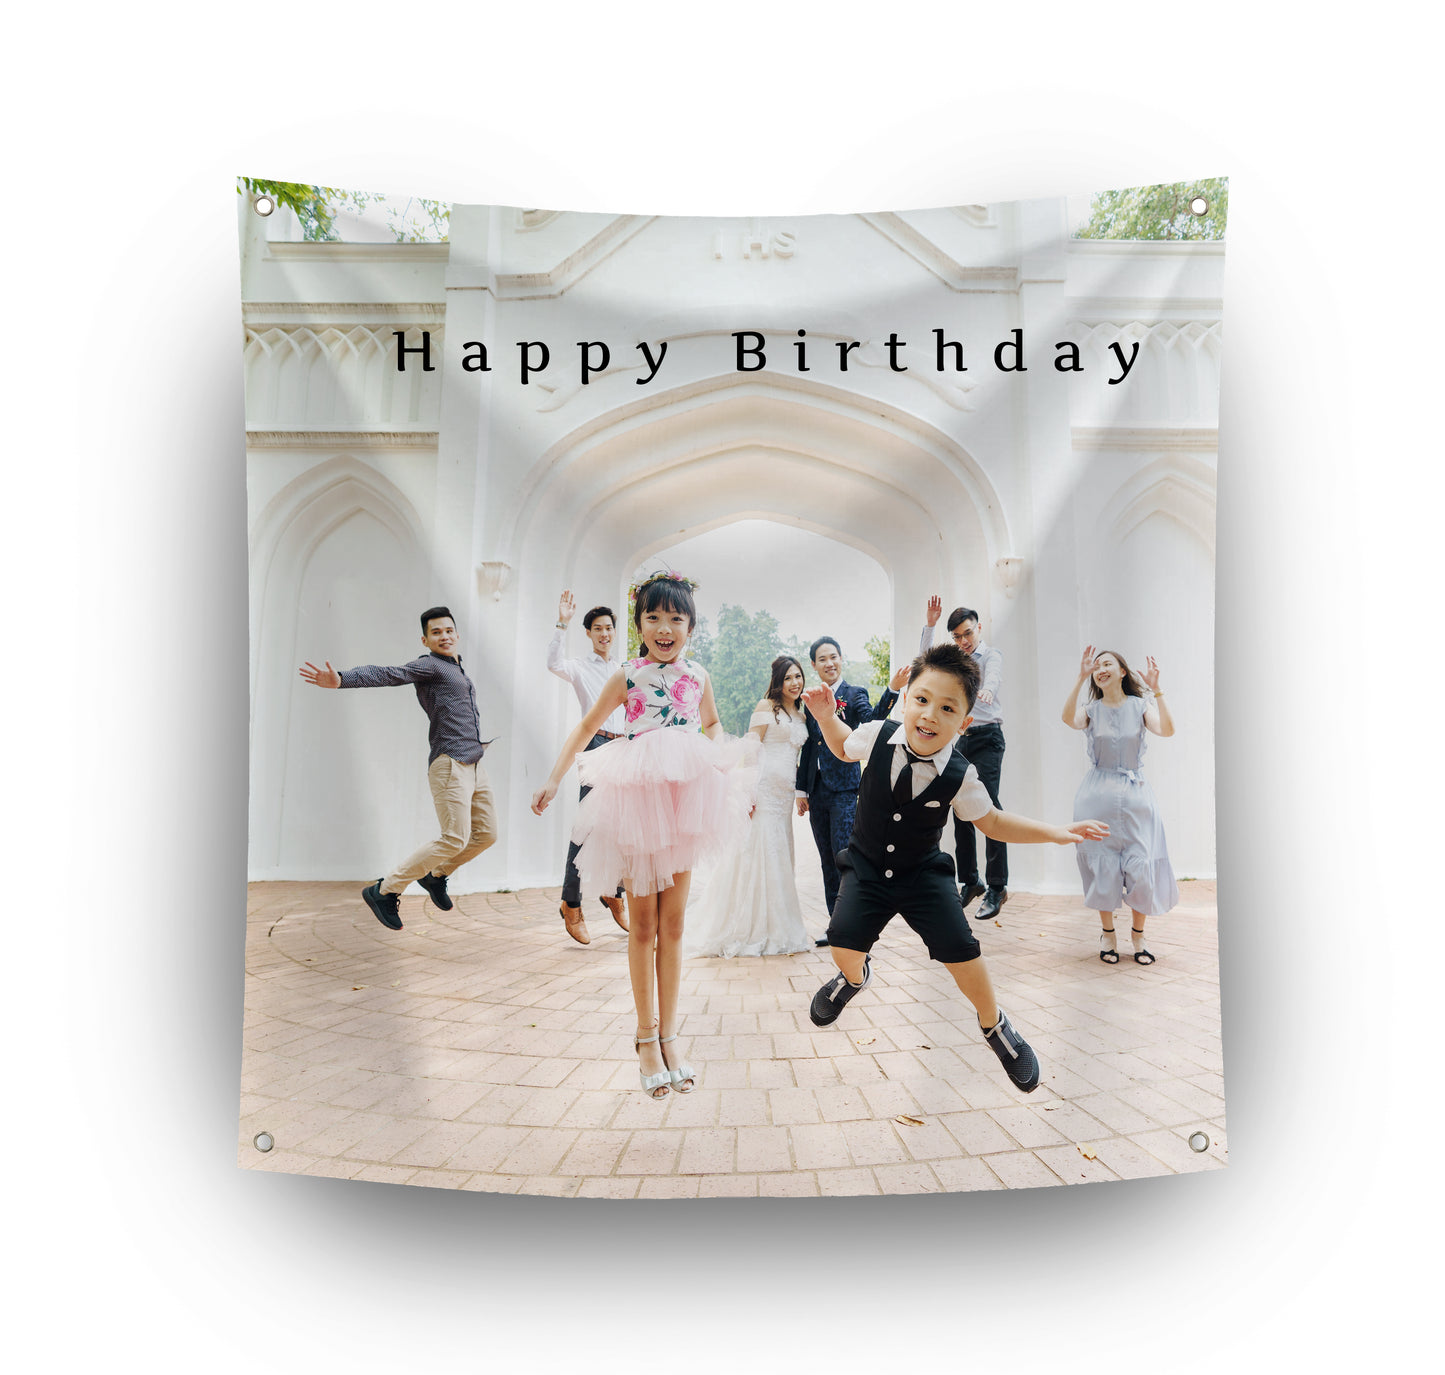 Personalised Photo Banner. Add Photo. Photo of Kids at Party, with Happy Birthday Text. Corner Eyelet.